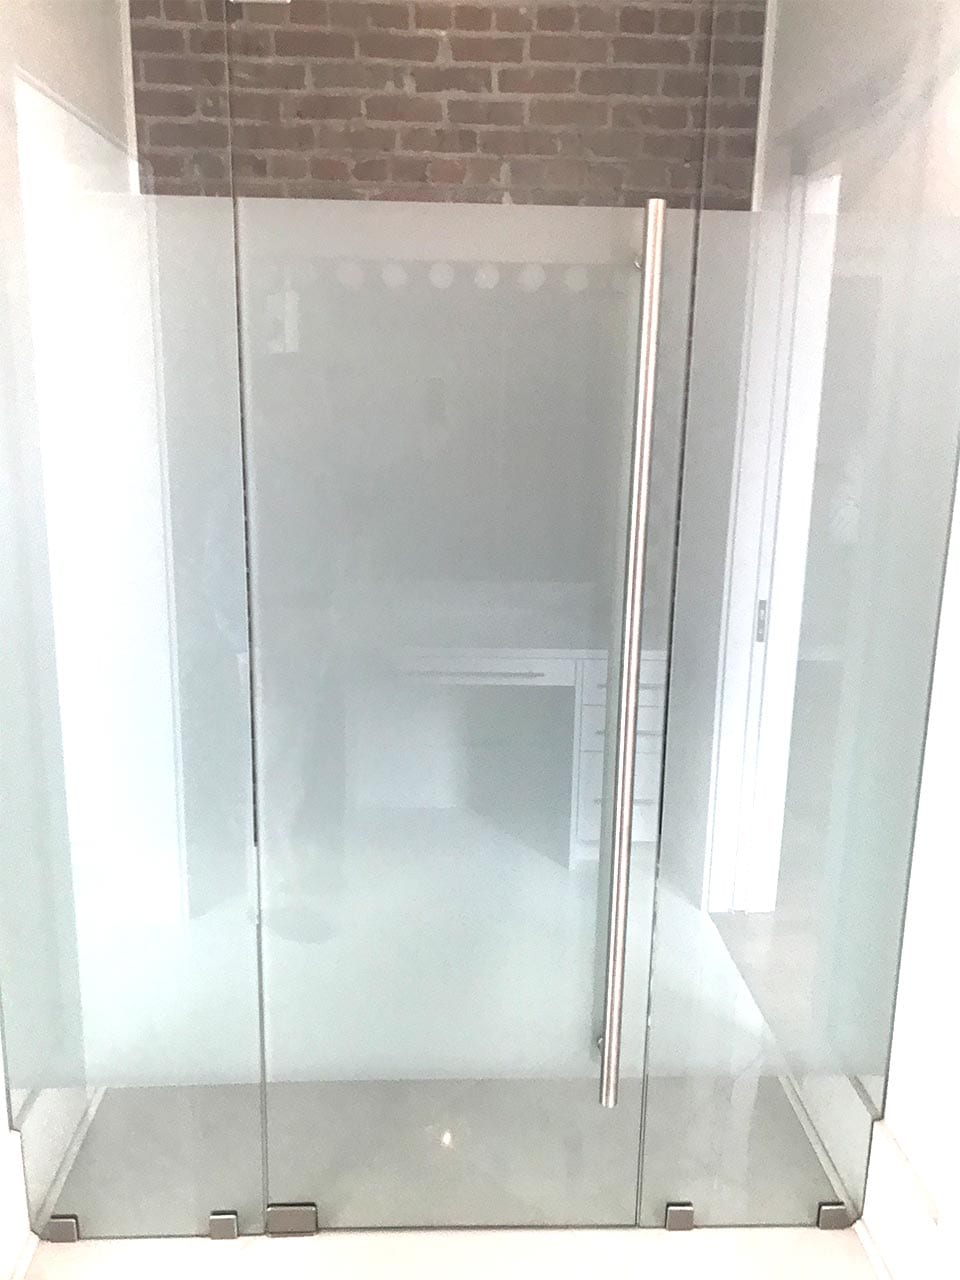 Frosted glass shower door installed by Reliable Glass & Mirror